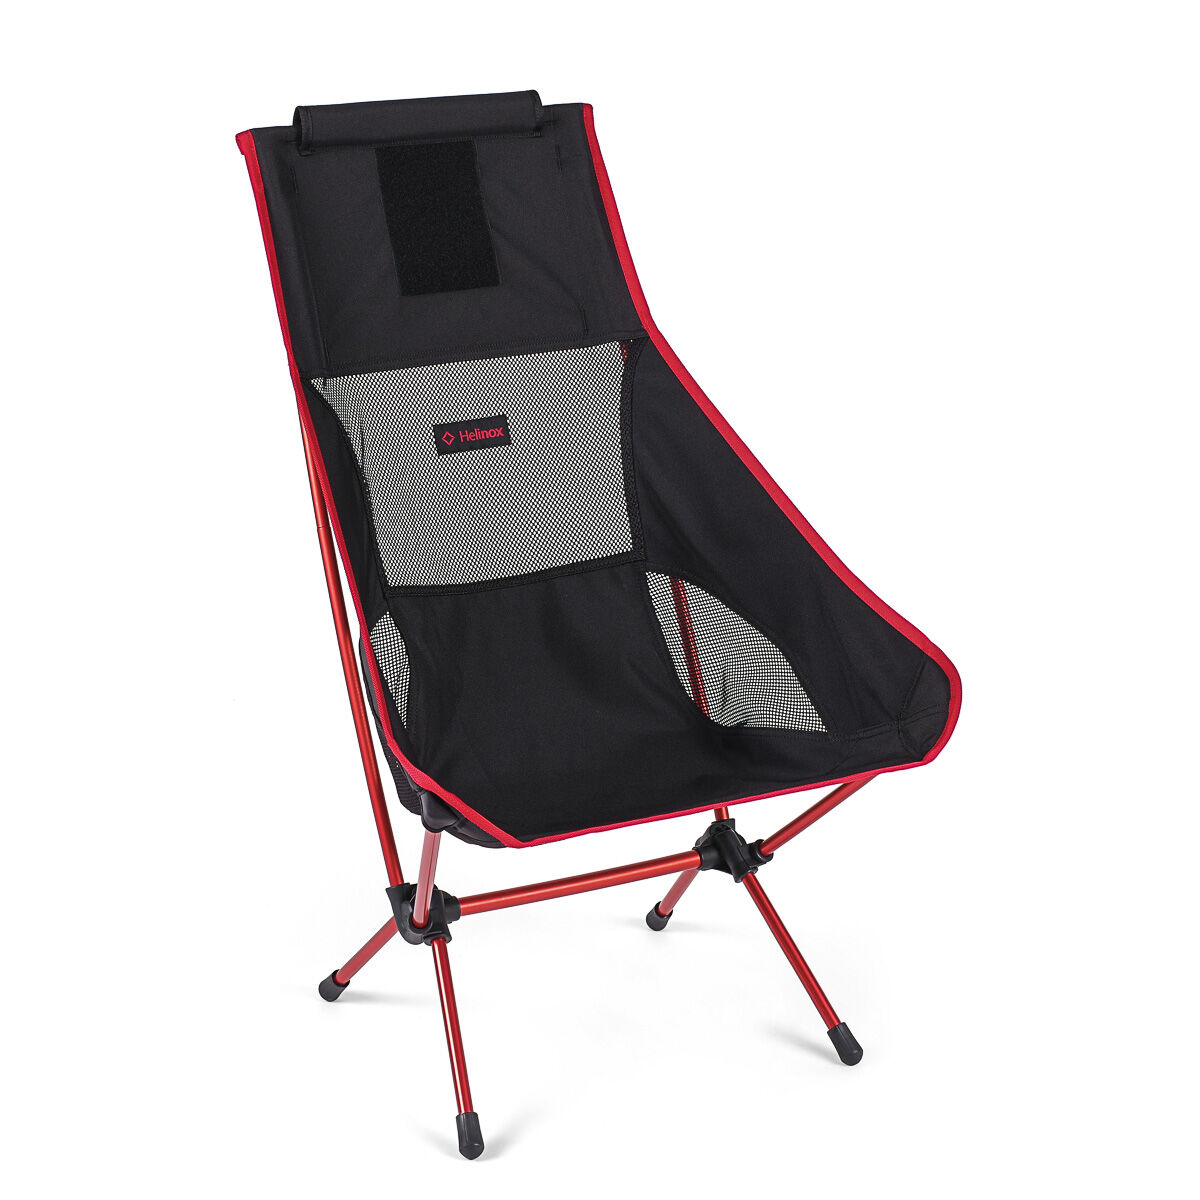 Helinox Chair Two 2021 Limited Edition - Silla de camping